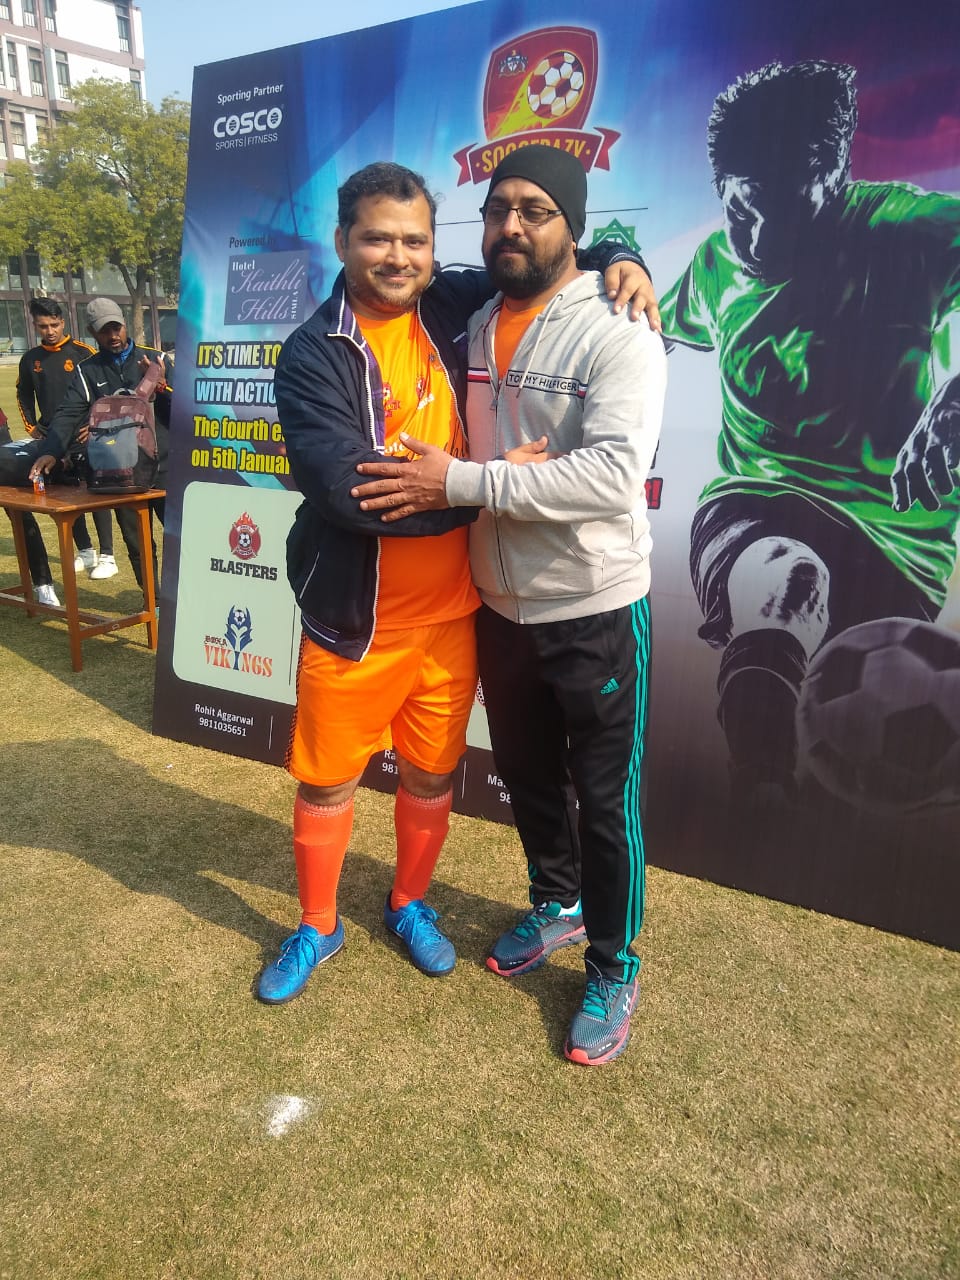 Soccerazy kicks off 4th Edition - Day 1 - 5th Jan, 2020<br>
<br>
It's time to kick off 2020 with action that's aplenty<br>
<br>
The fouth edition of Scoccerazy by DOXA kicks off on 5th January 2020. Warm up to the Doxaitement!